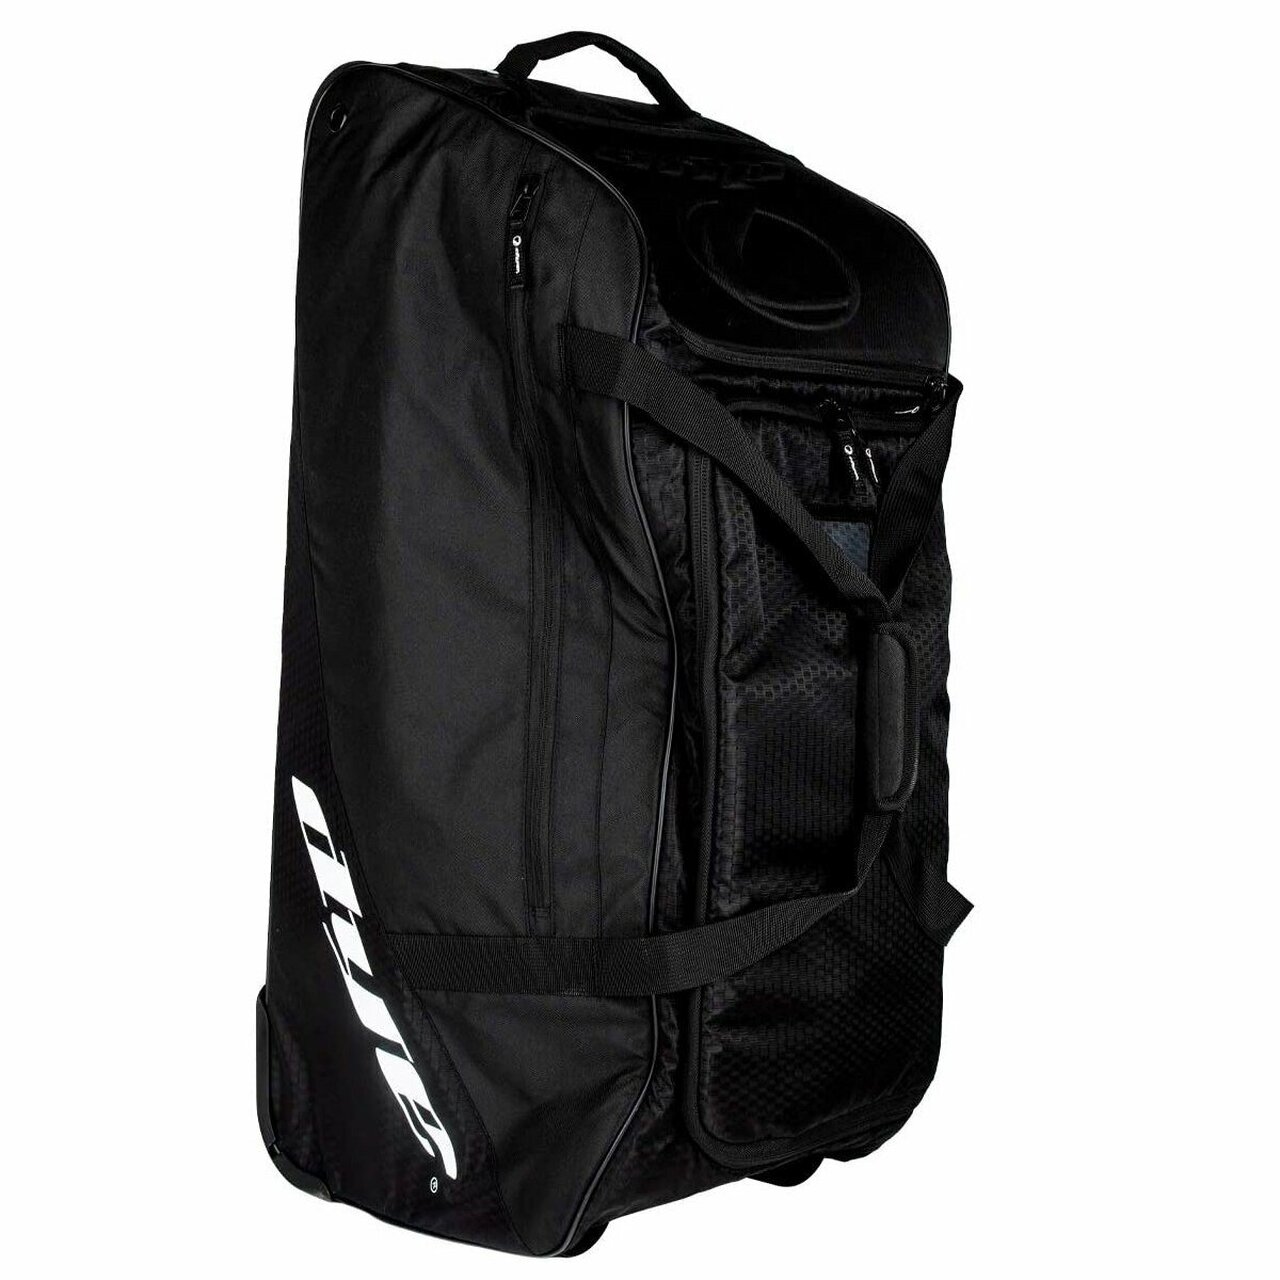 Dye Paintball Discovery 1.5L Rolling Gear Equipment Bag